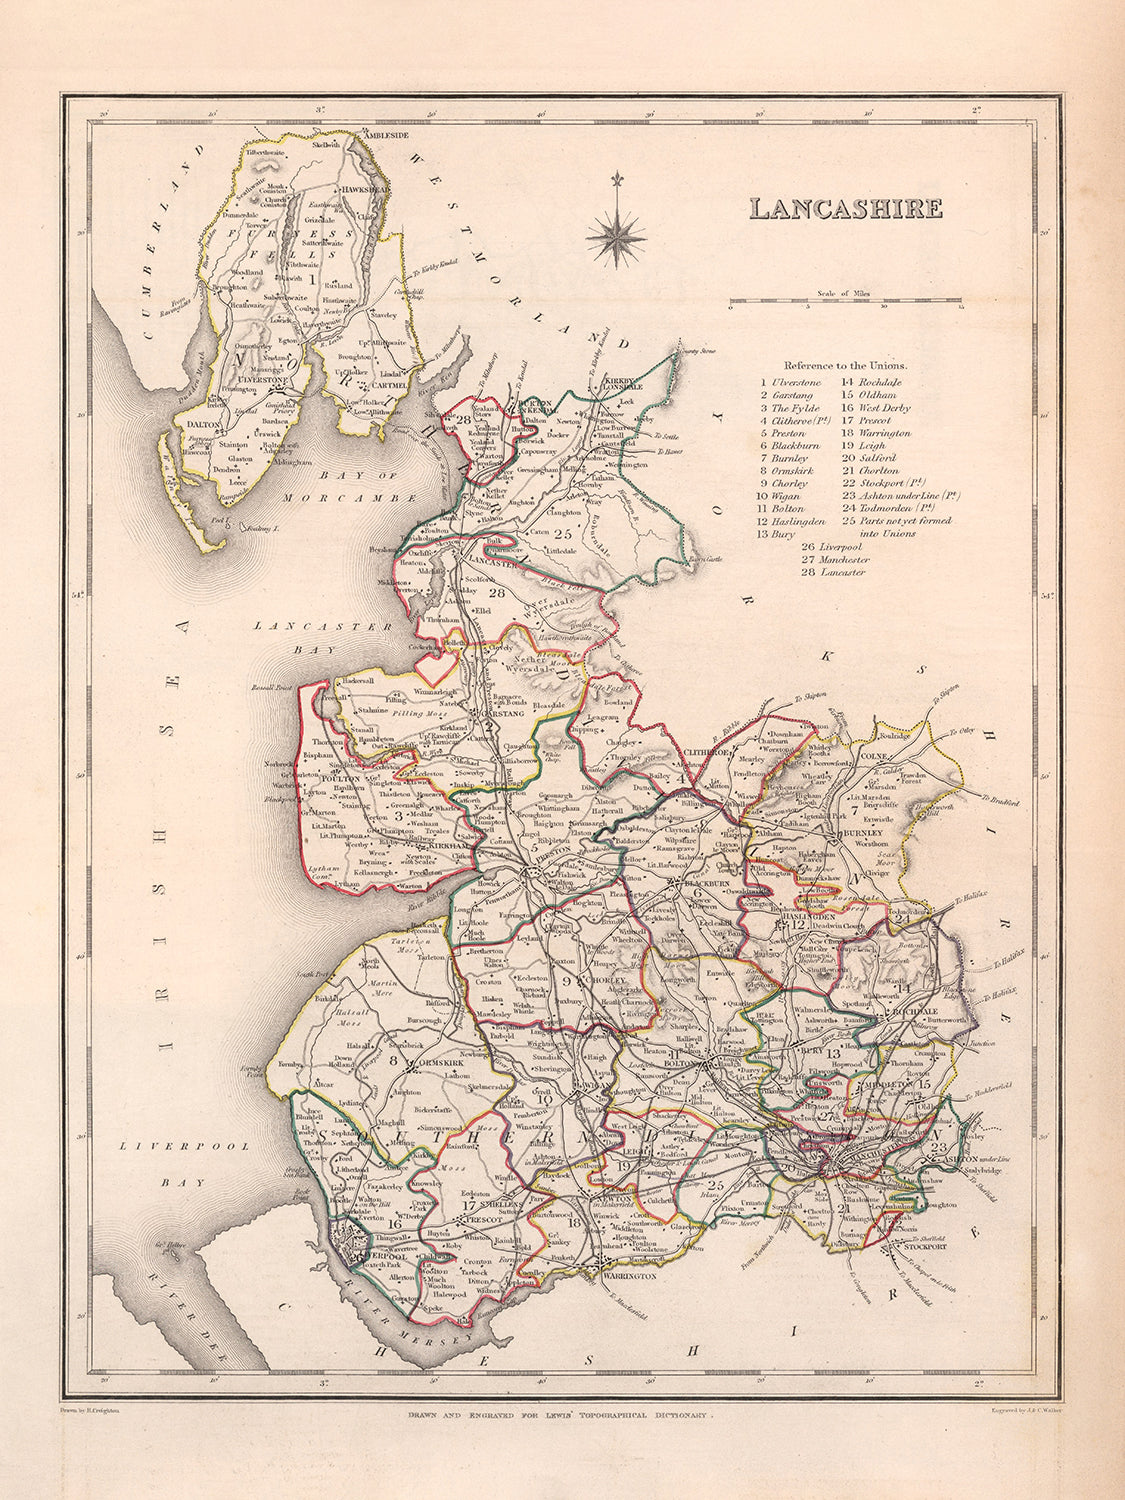 Old Map of Lancashire by Samuel Lewis, 1844: Manchester, Liverpool, Preston, Blackburn, and Oldham